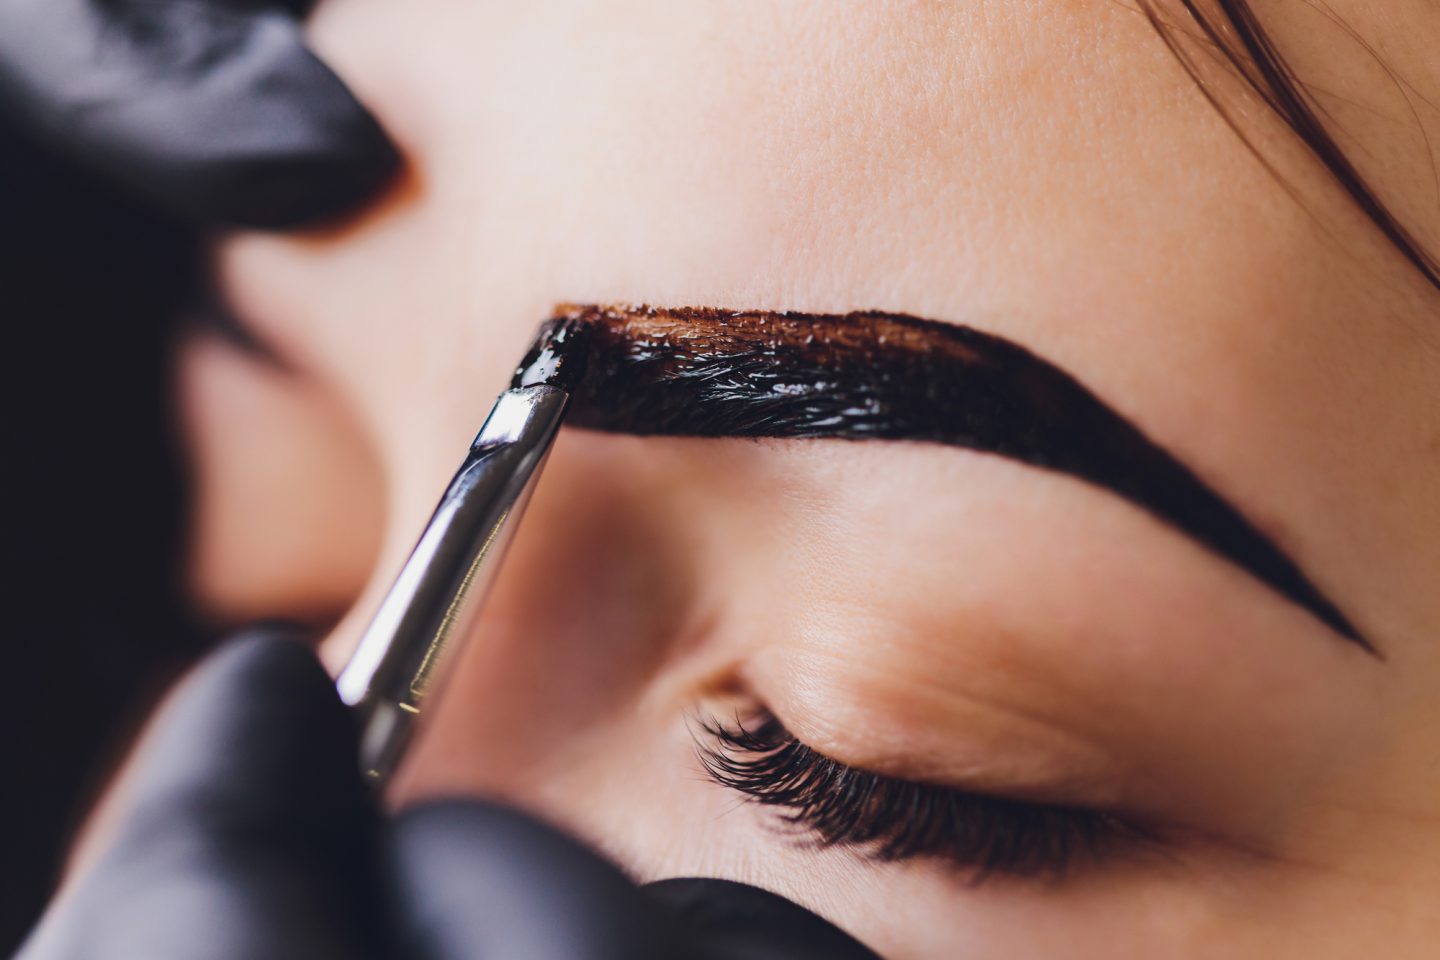 Henna Brows Vs Microblading - Which Is Best